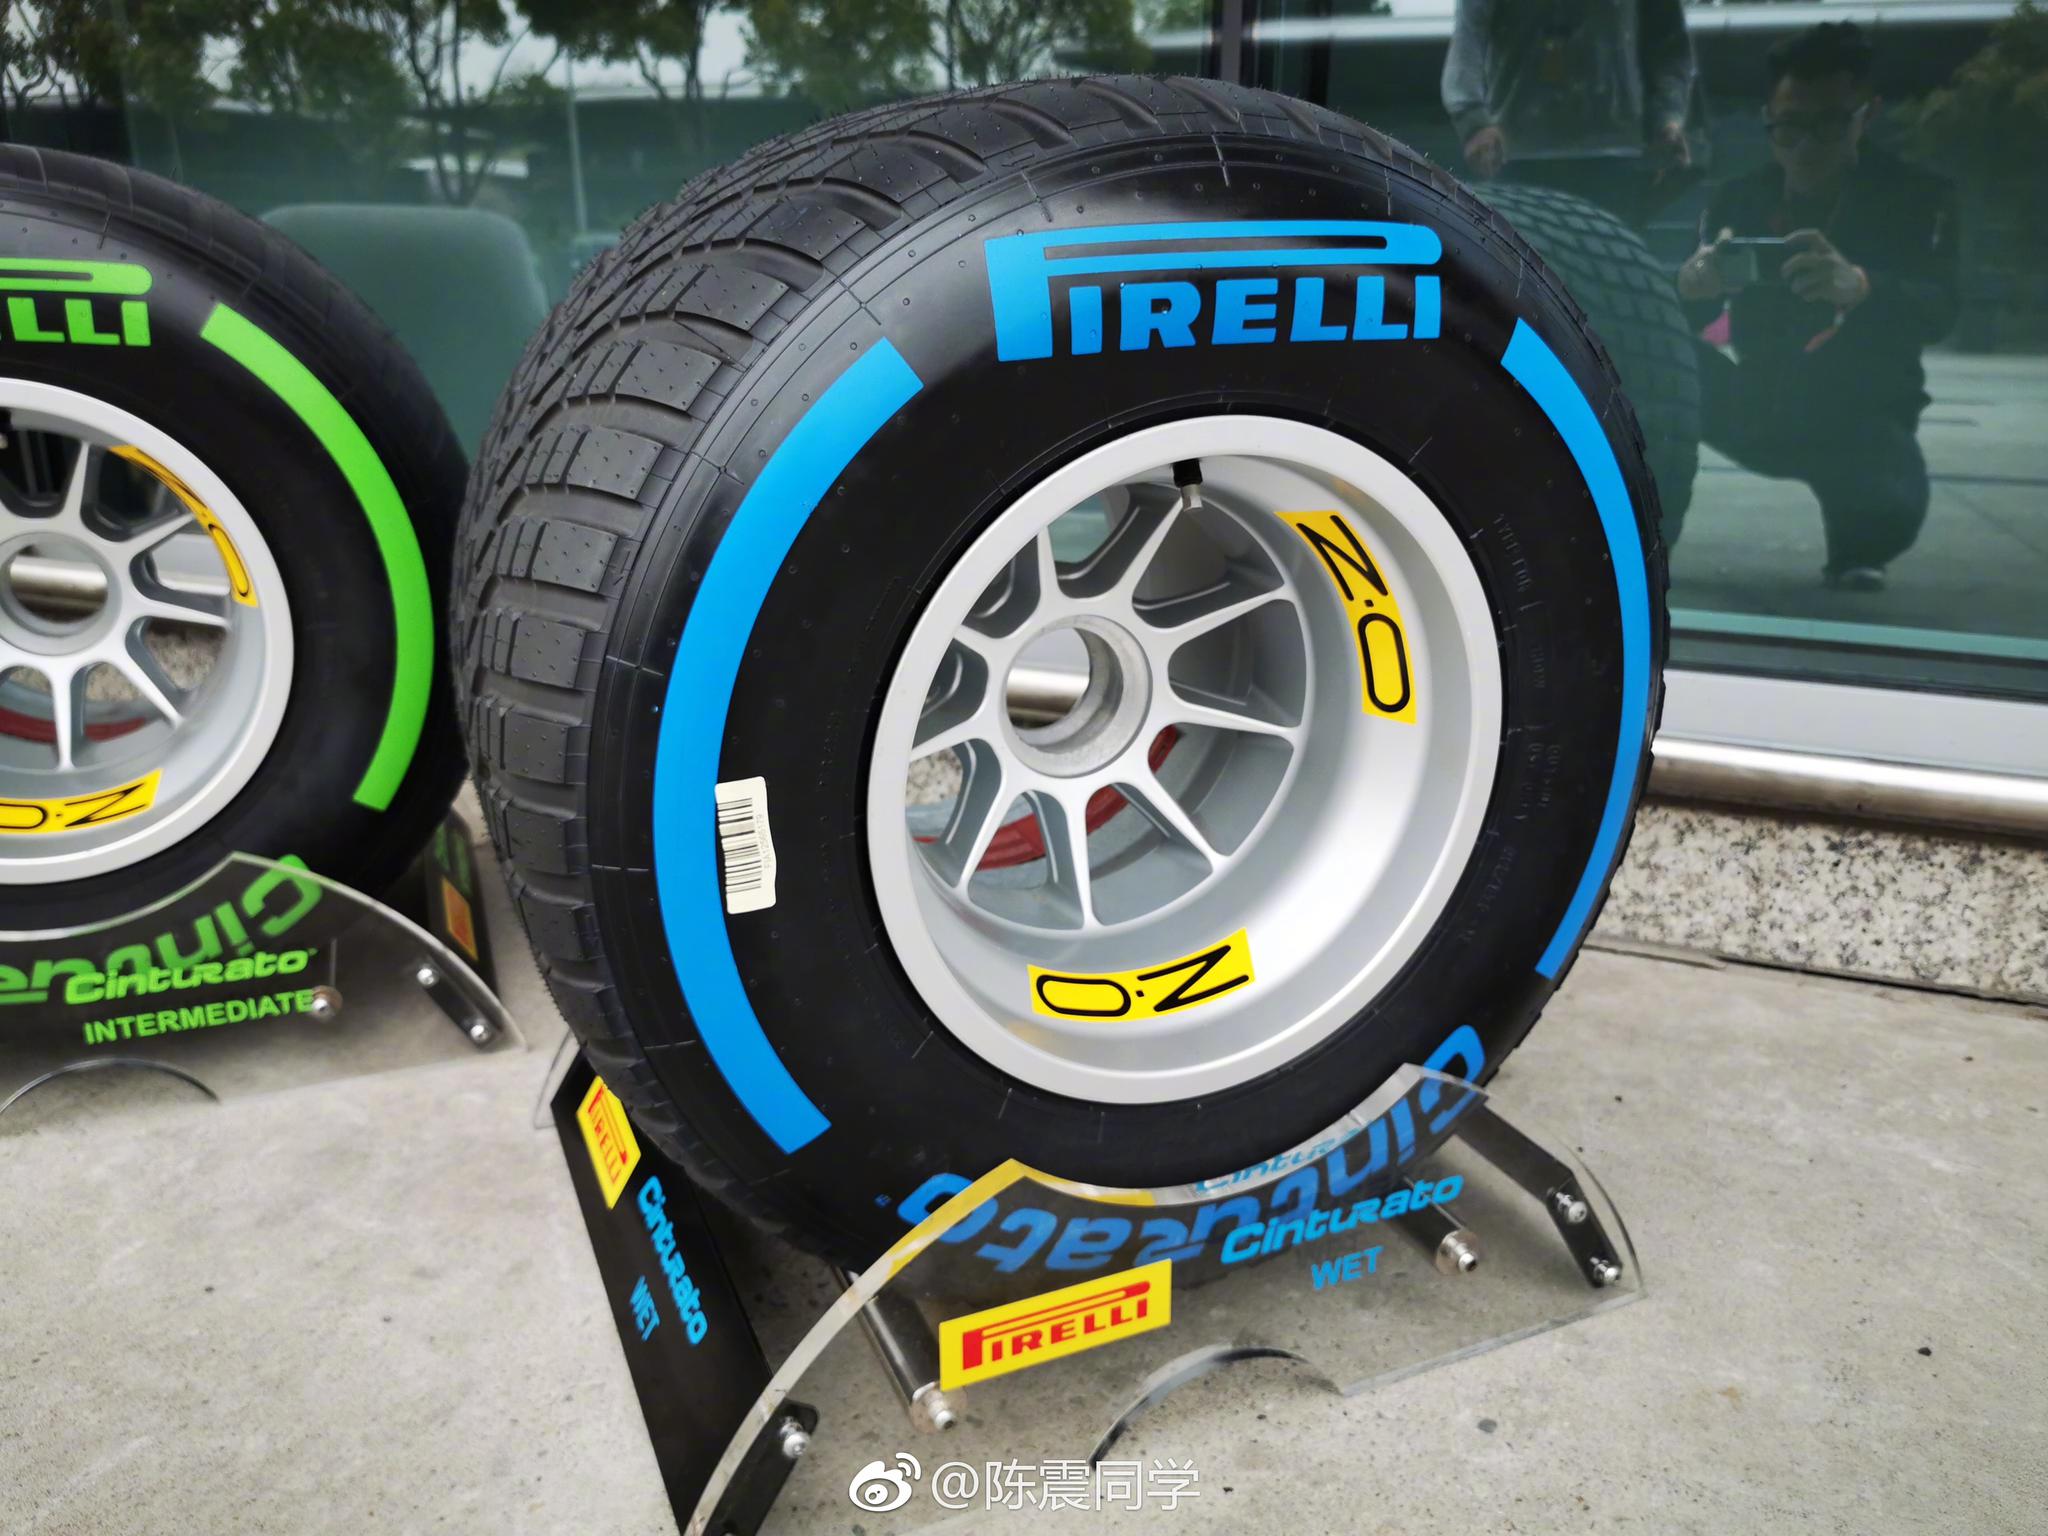 New slick tyre extends Pirelli F1 range, 3 compounds available per race weekend - Tyrepress